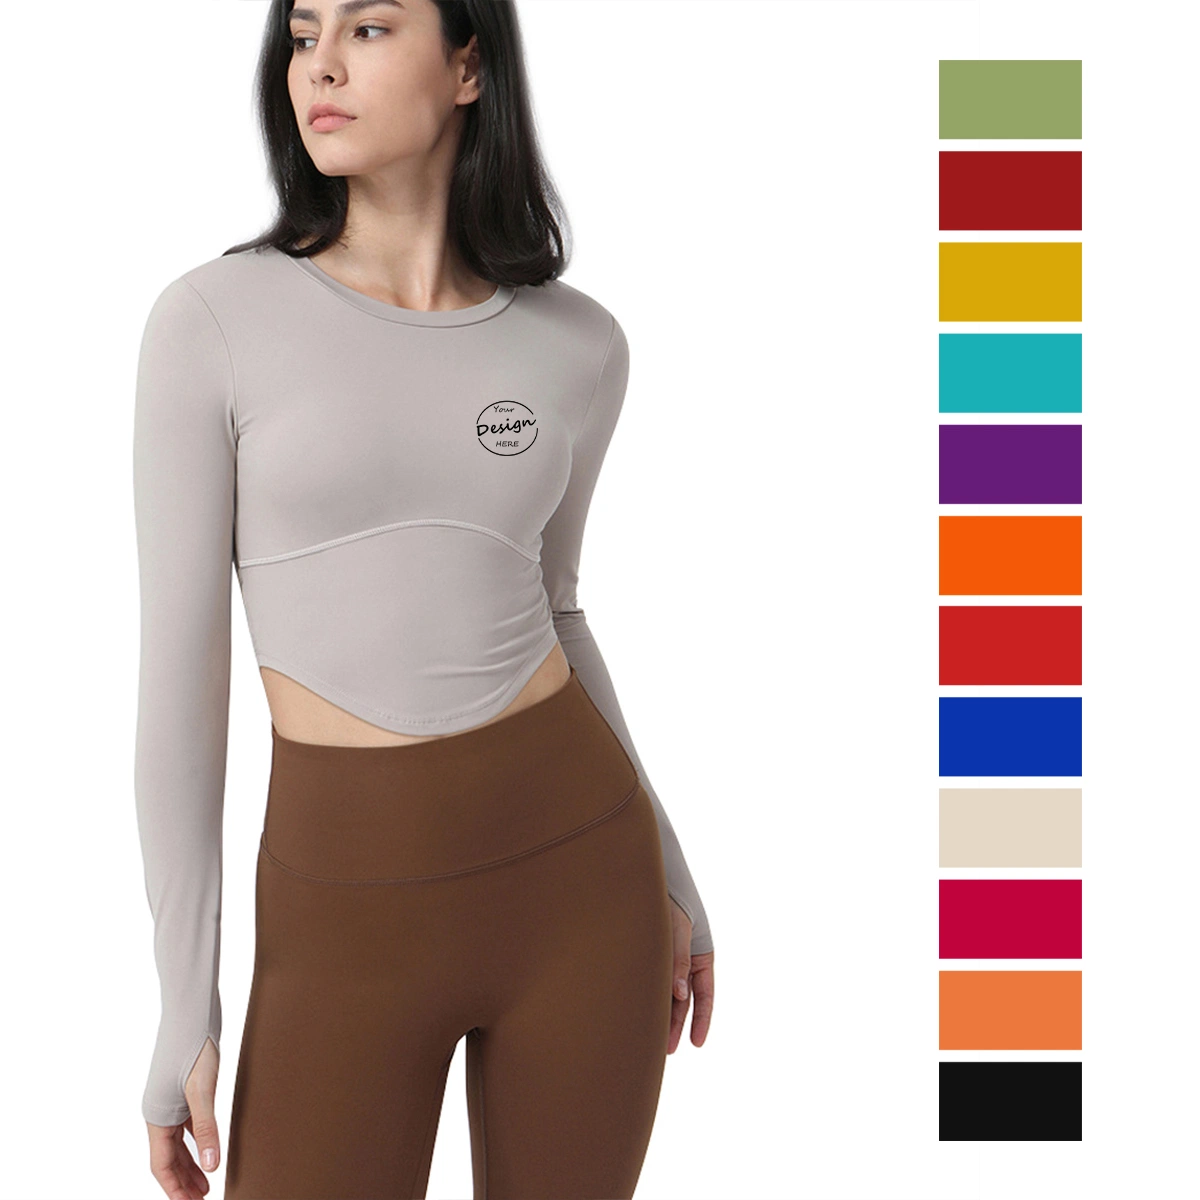 Women Gym Workout Yoga Crop Tops Long Sleeve Athletic Shirts Compression Sports Active Wear Shirts with Thumb Hole Yoga Fitness